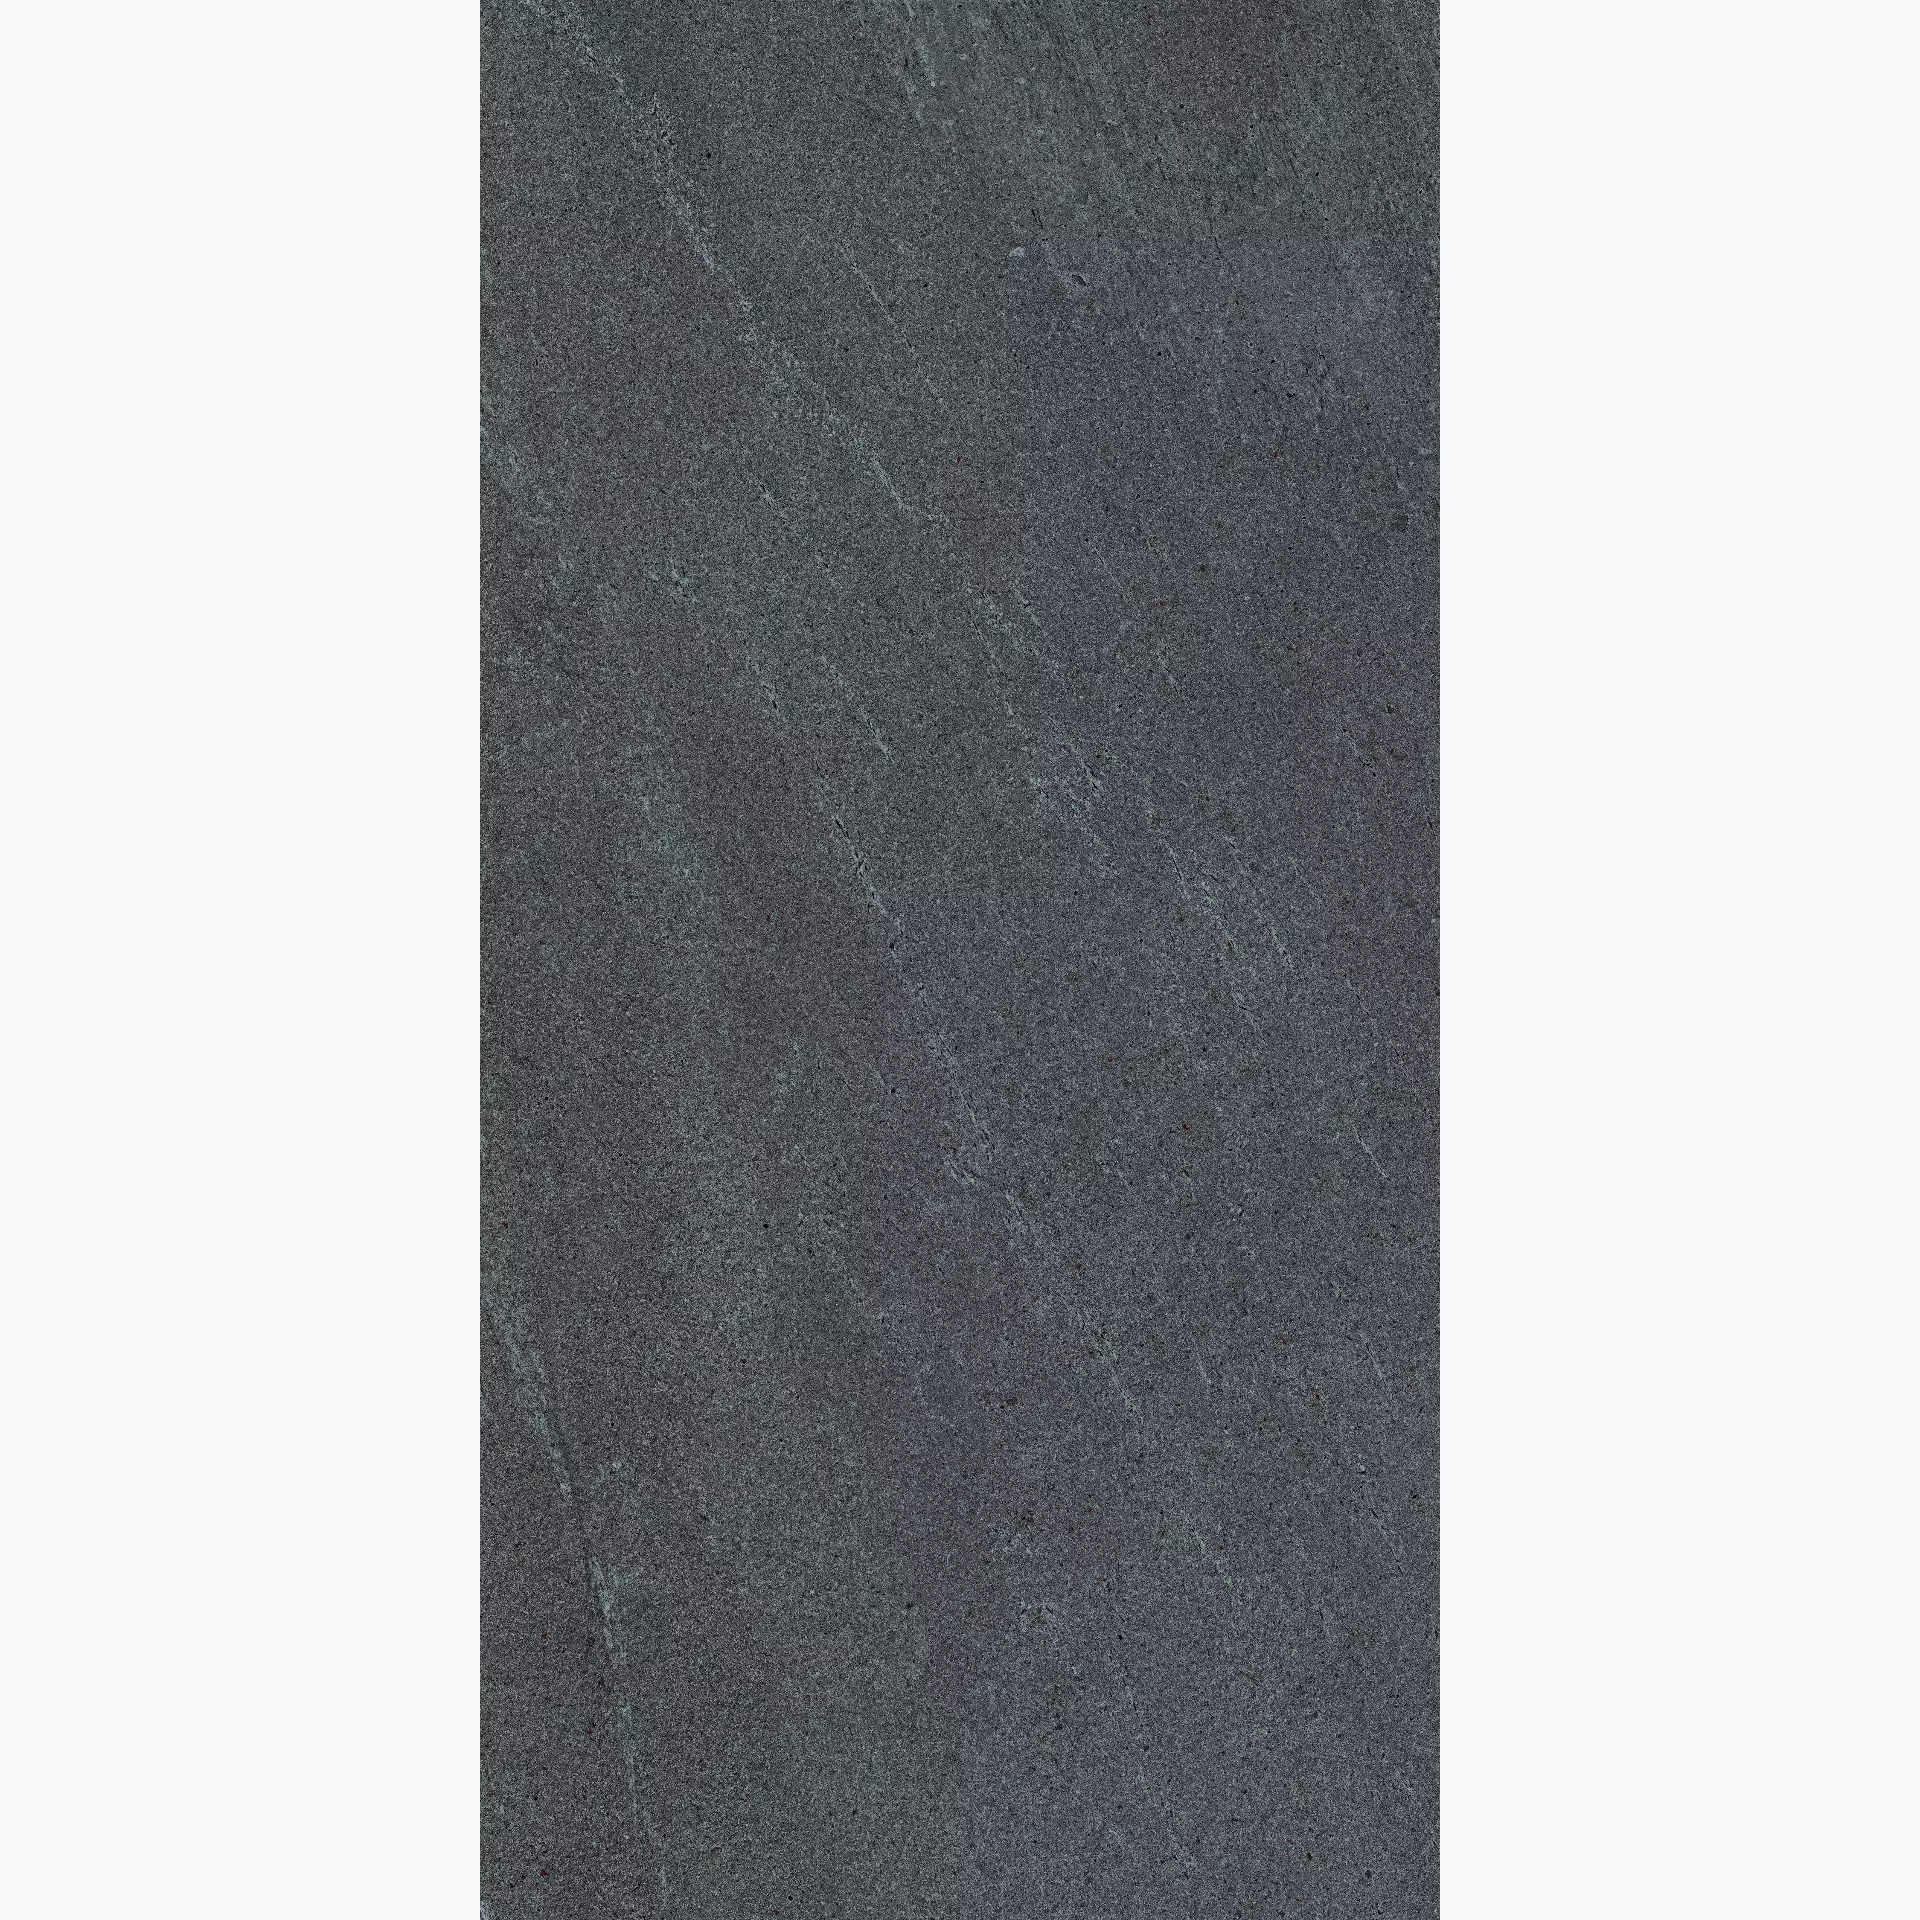 Cottodeste Blend Stone Deep Naturale Protect EGEBS10 90x180cm rectified 14mm